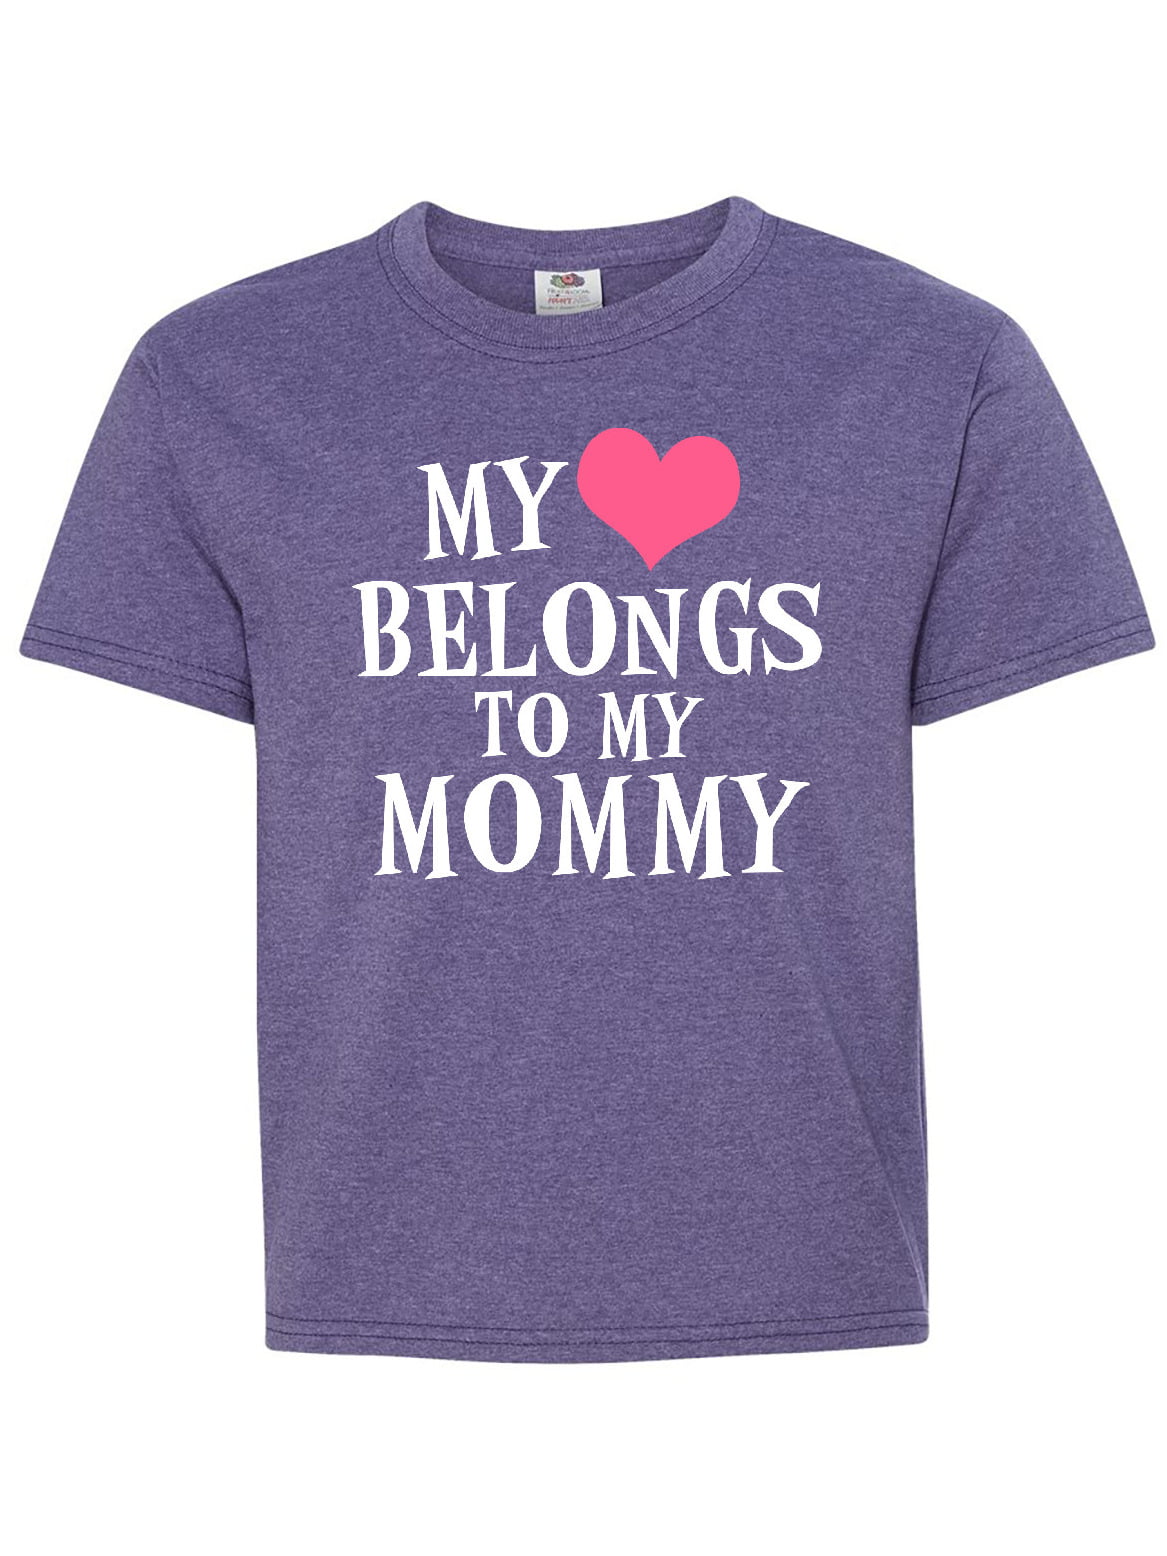 Your heart belongs to your mom Short-Sleeve Unisex T-Shirt